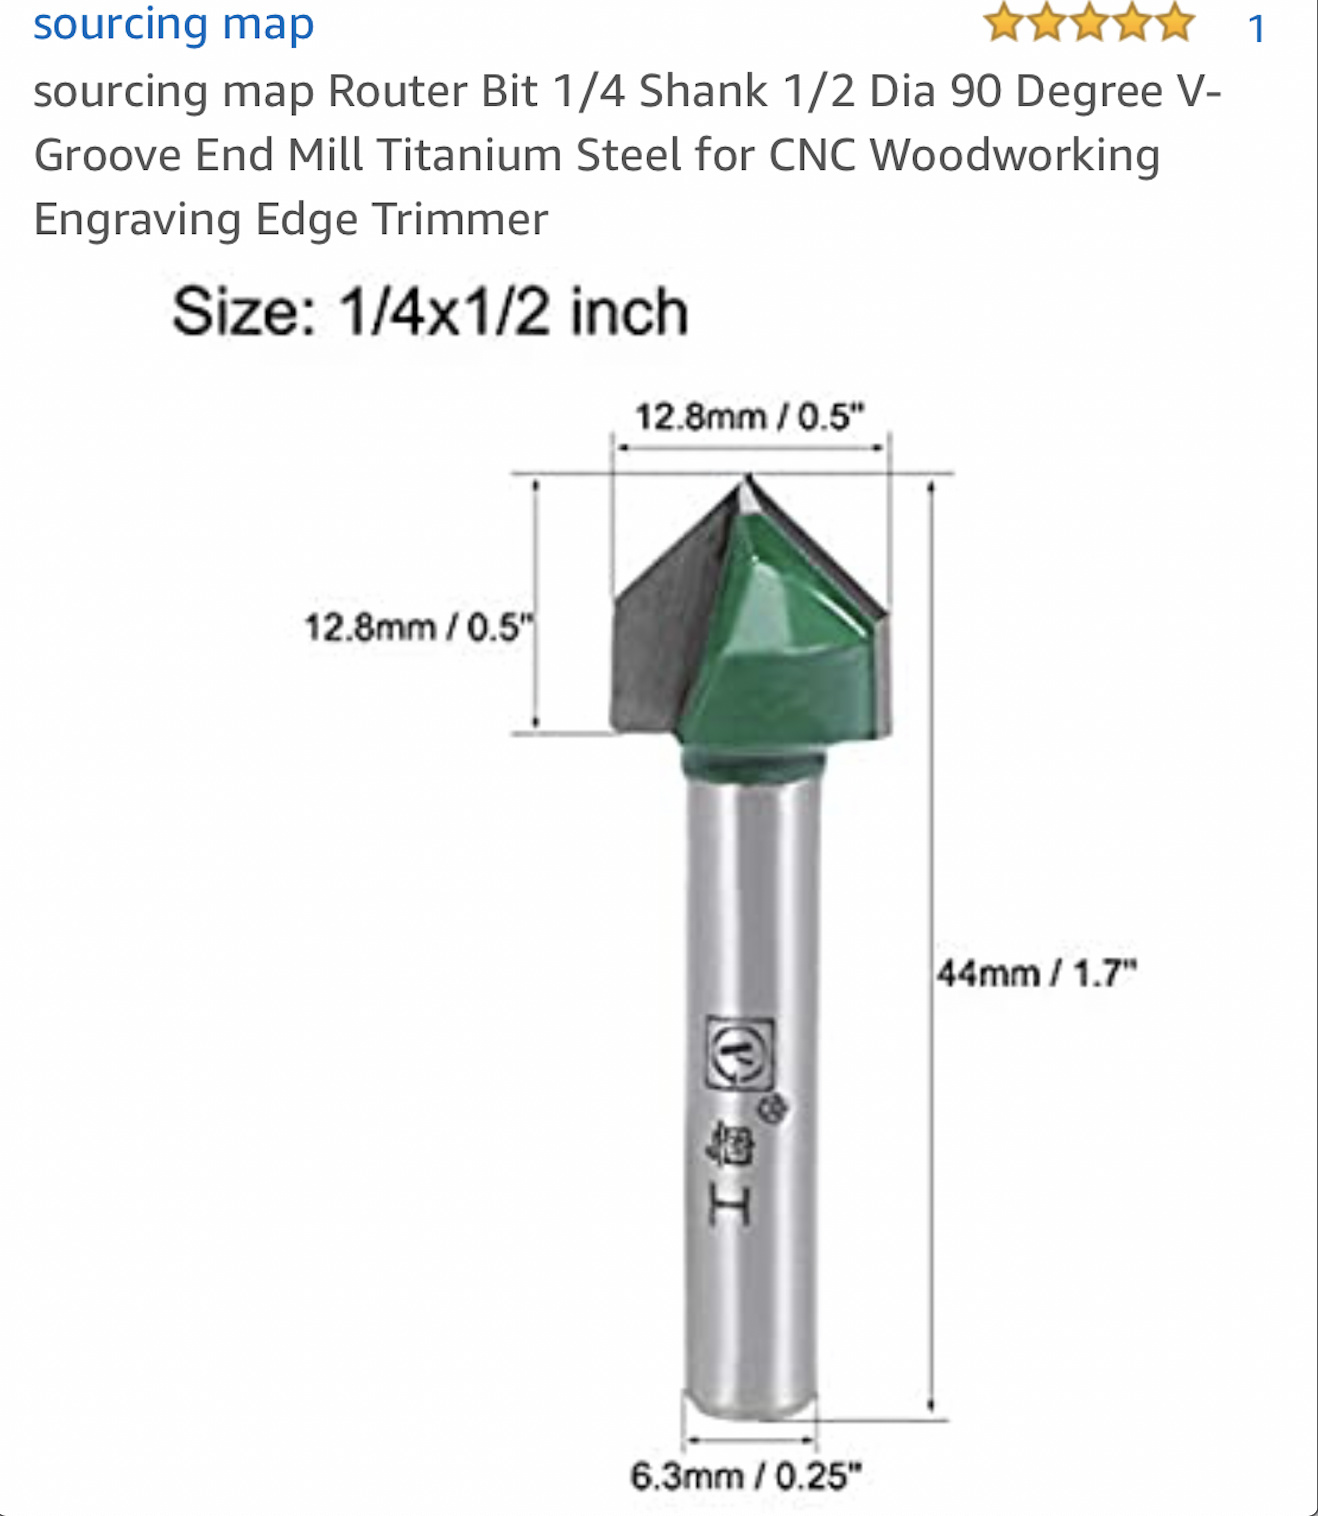 sourcing map Router Bit 1/4 Shank 1/2 Dia 90 Degree V-Groove End Mill Titaniu... 